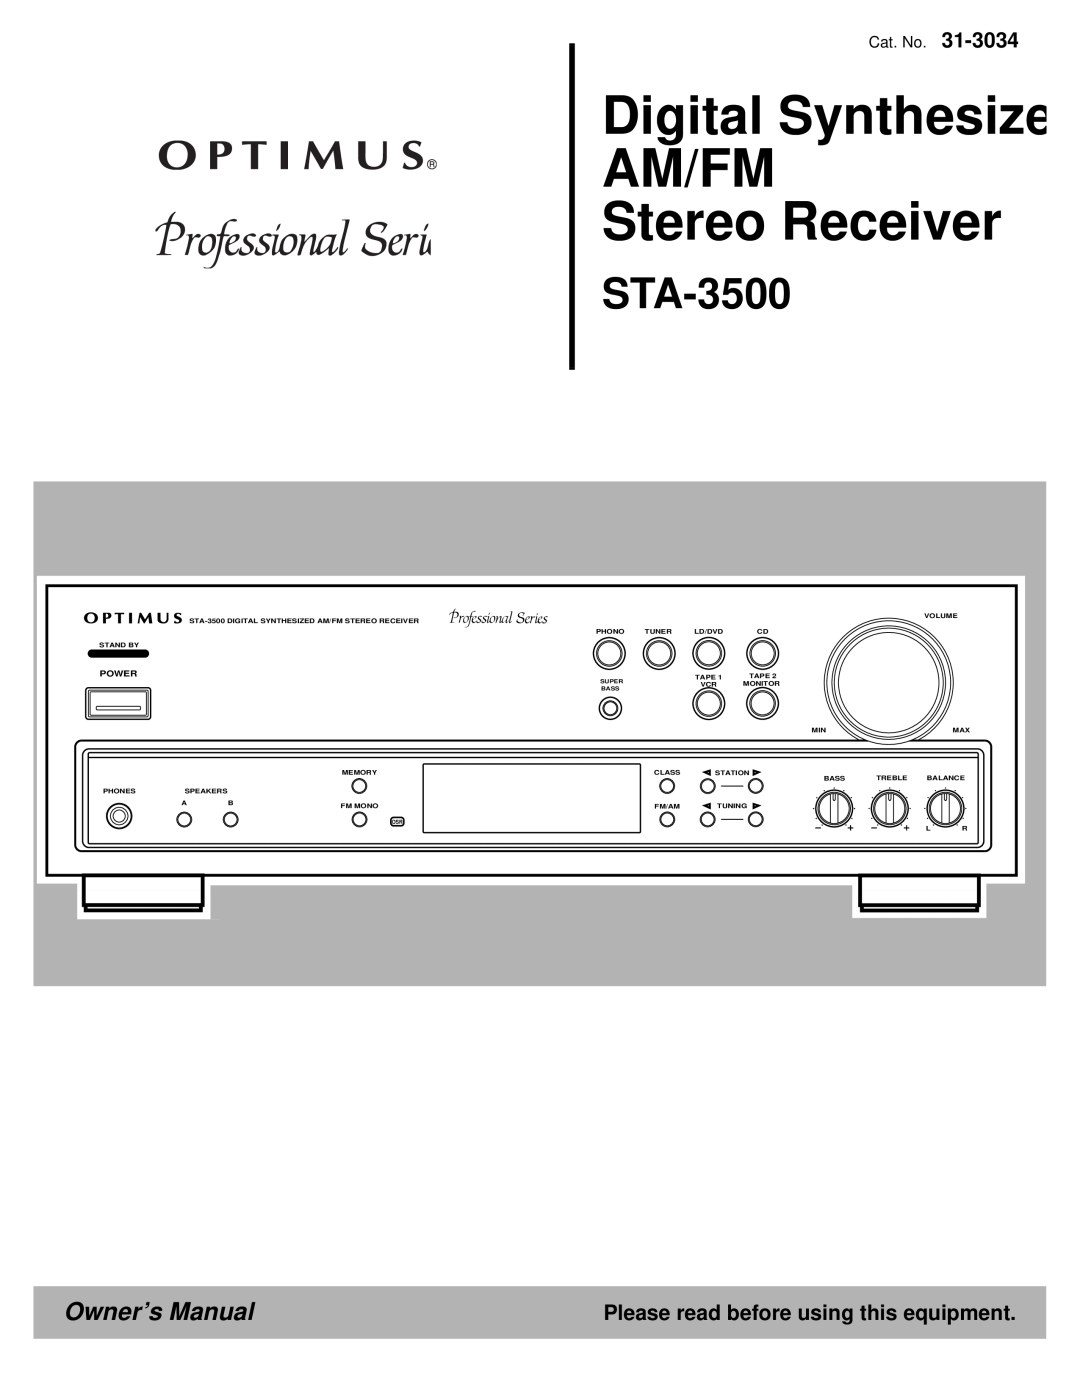 Optimus STA-3500 owner manual Please read before using this equipment, Digital Synthesize AM/FM Stereo Receiver 